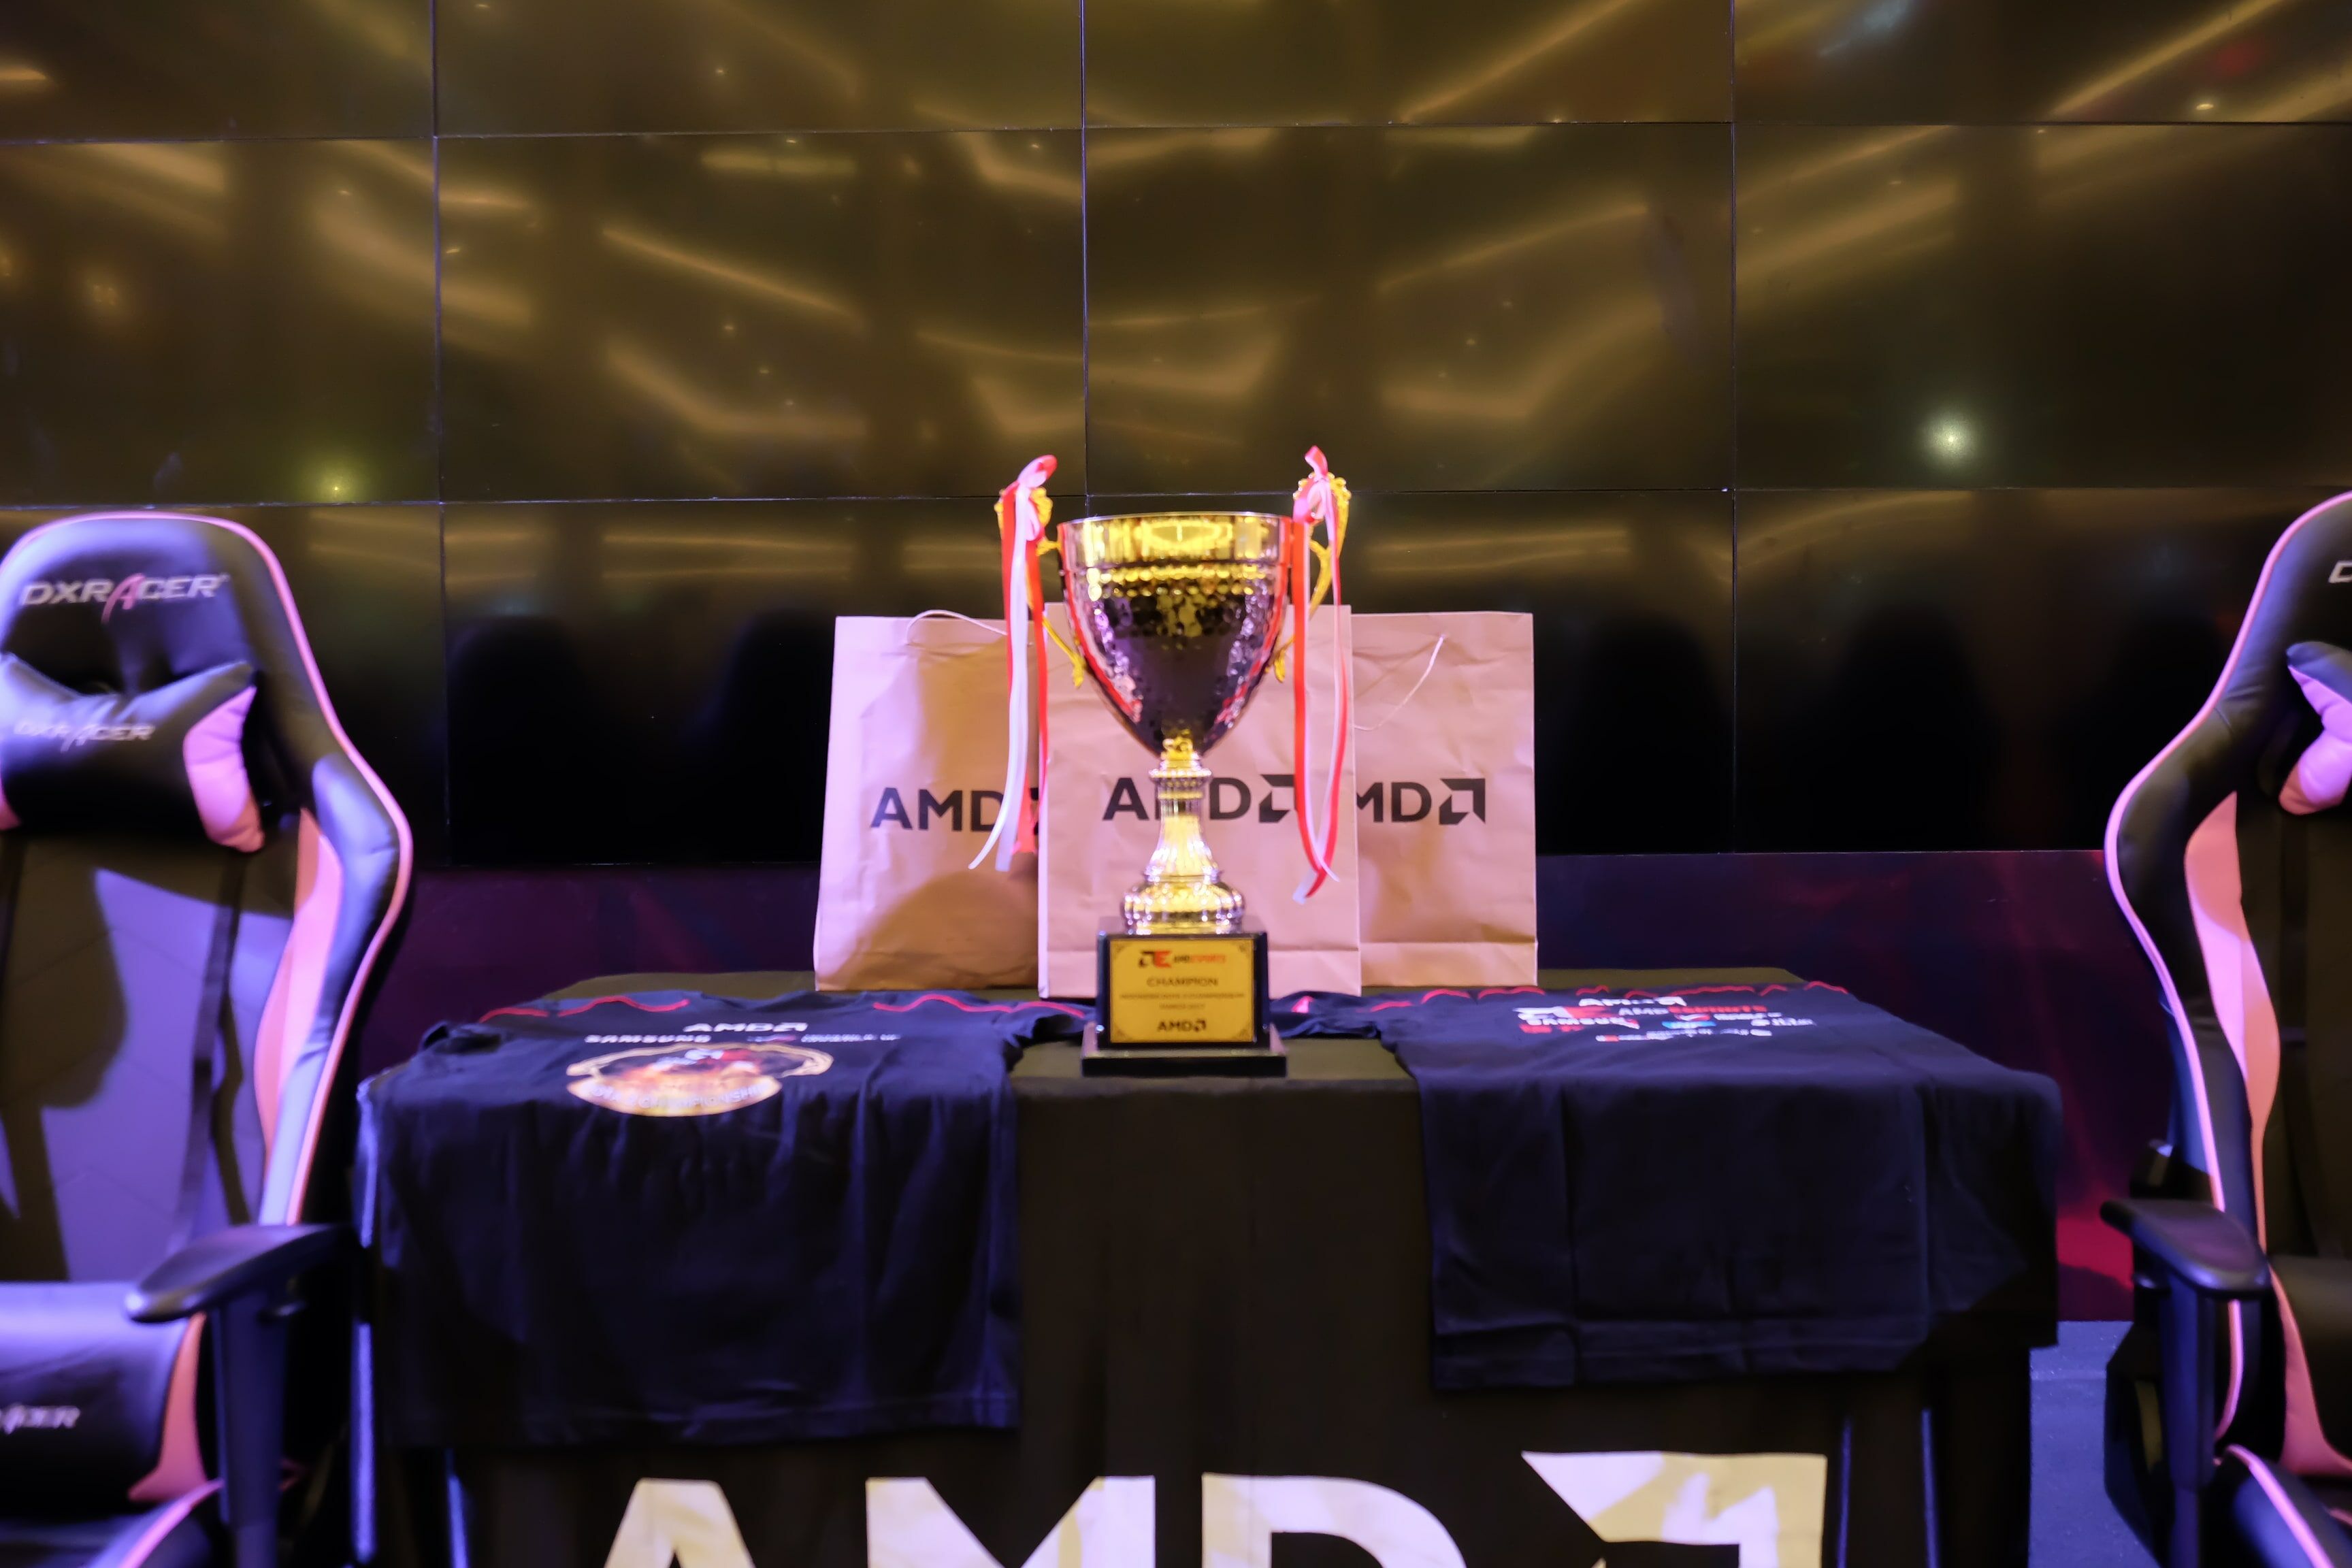 Amd Esports Indonesia Dota 2 Gaming Competition 2